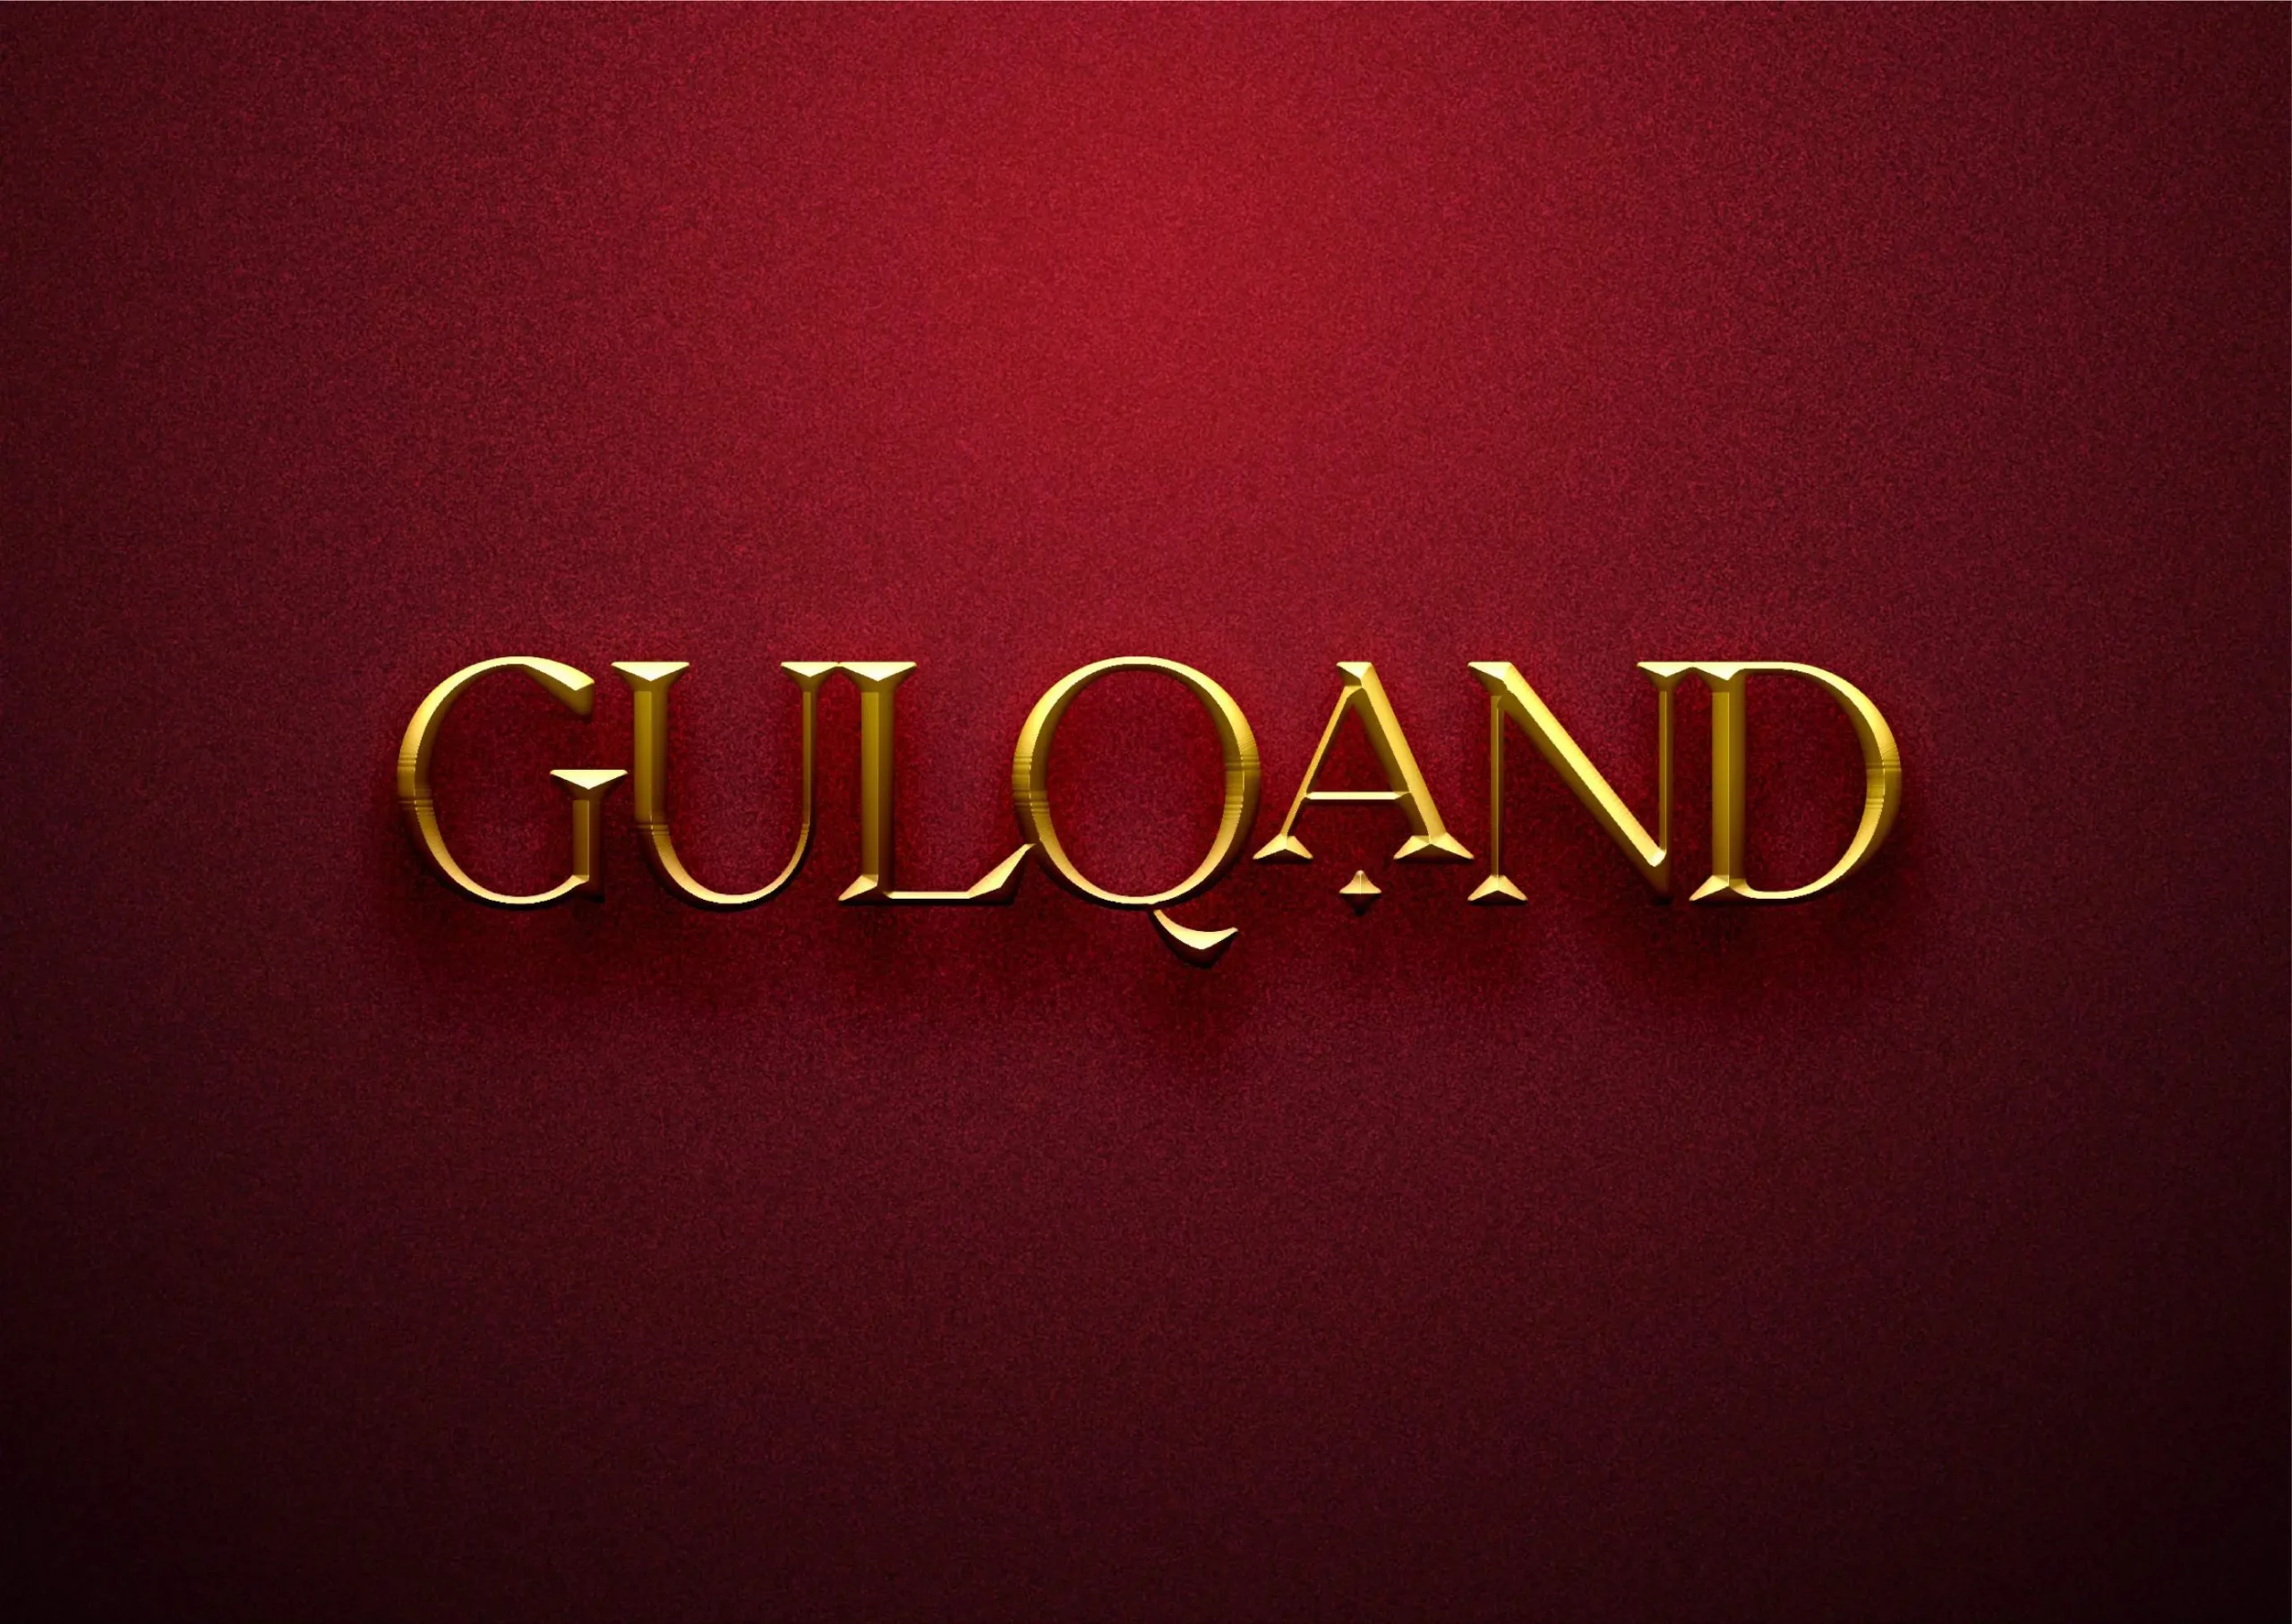 The word guland on a red background.